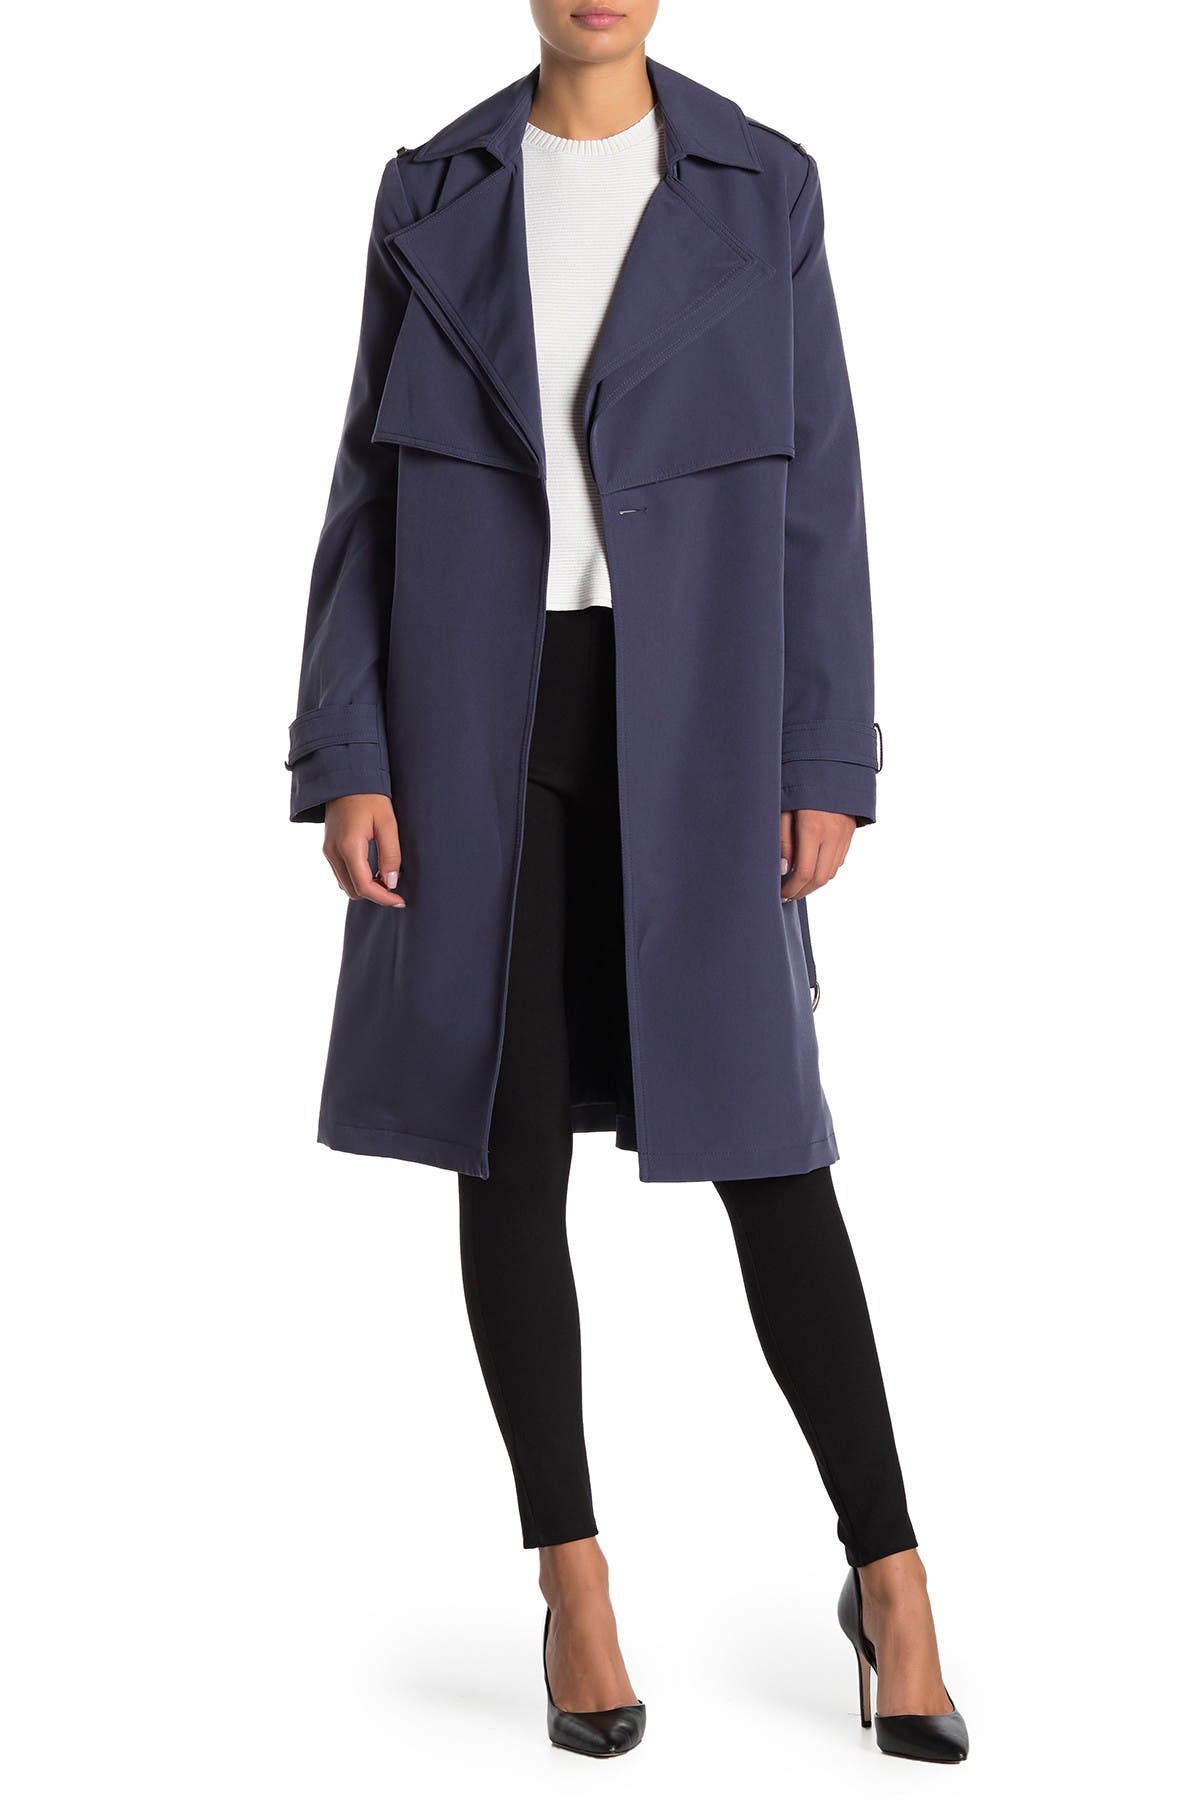 michael kors belted trench coat